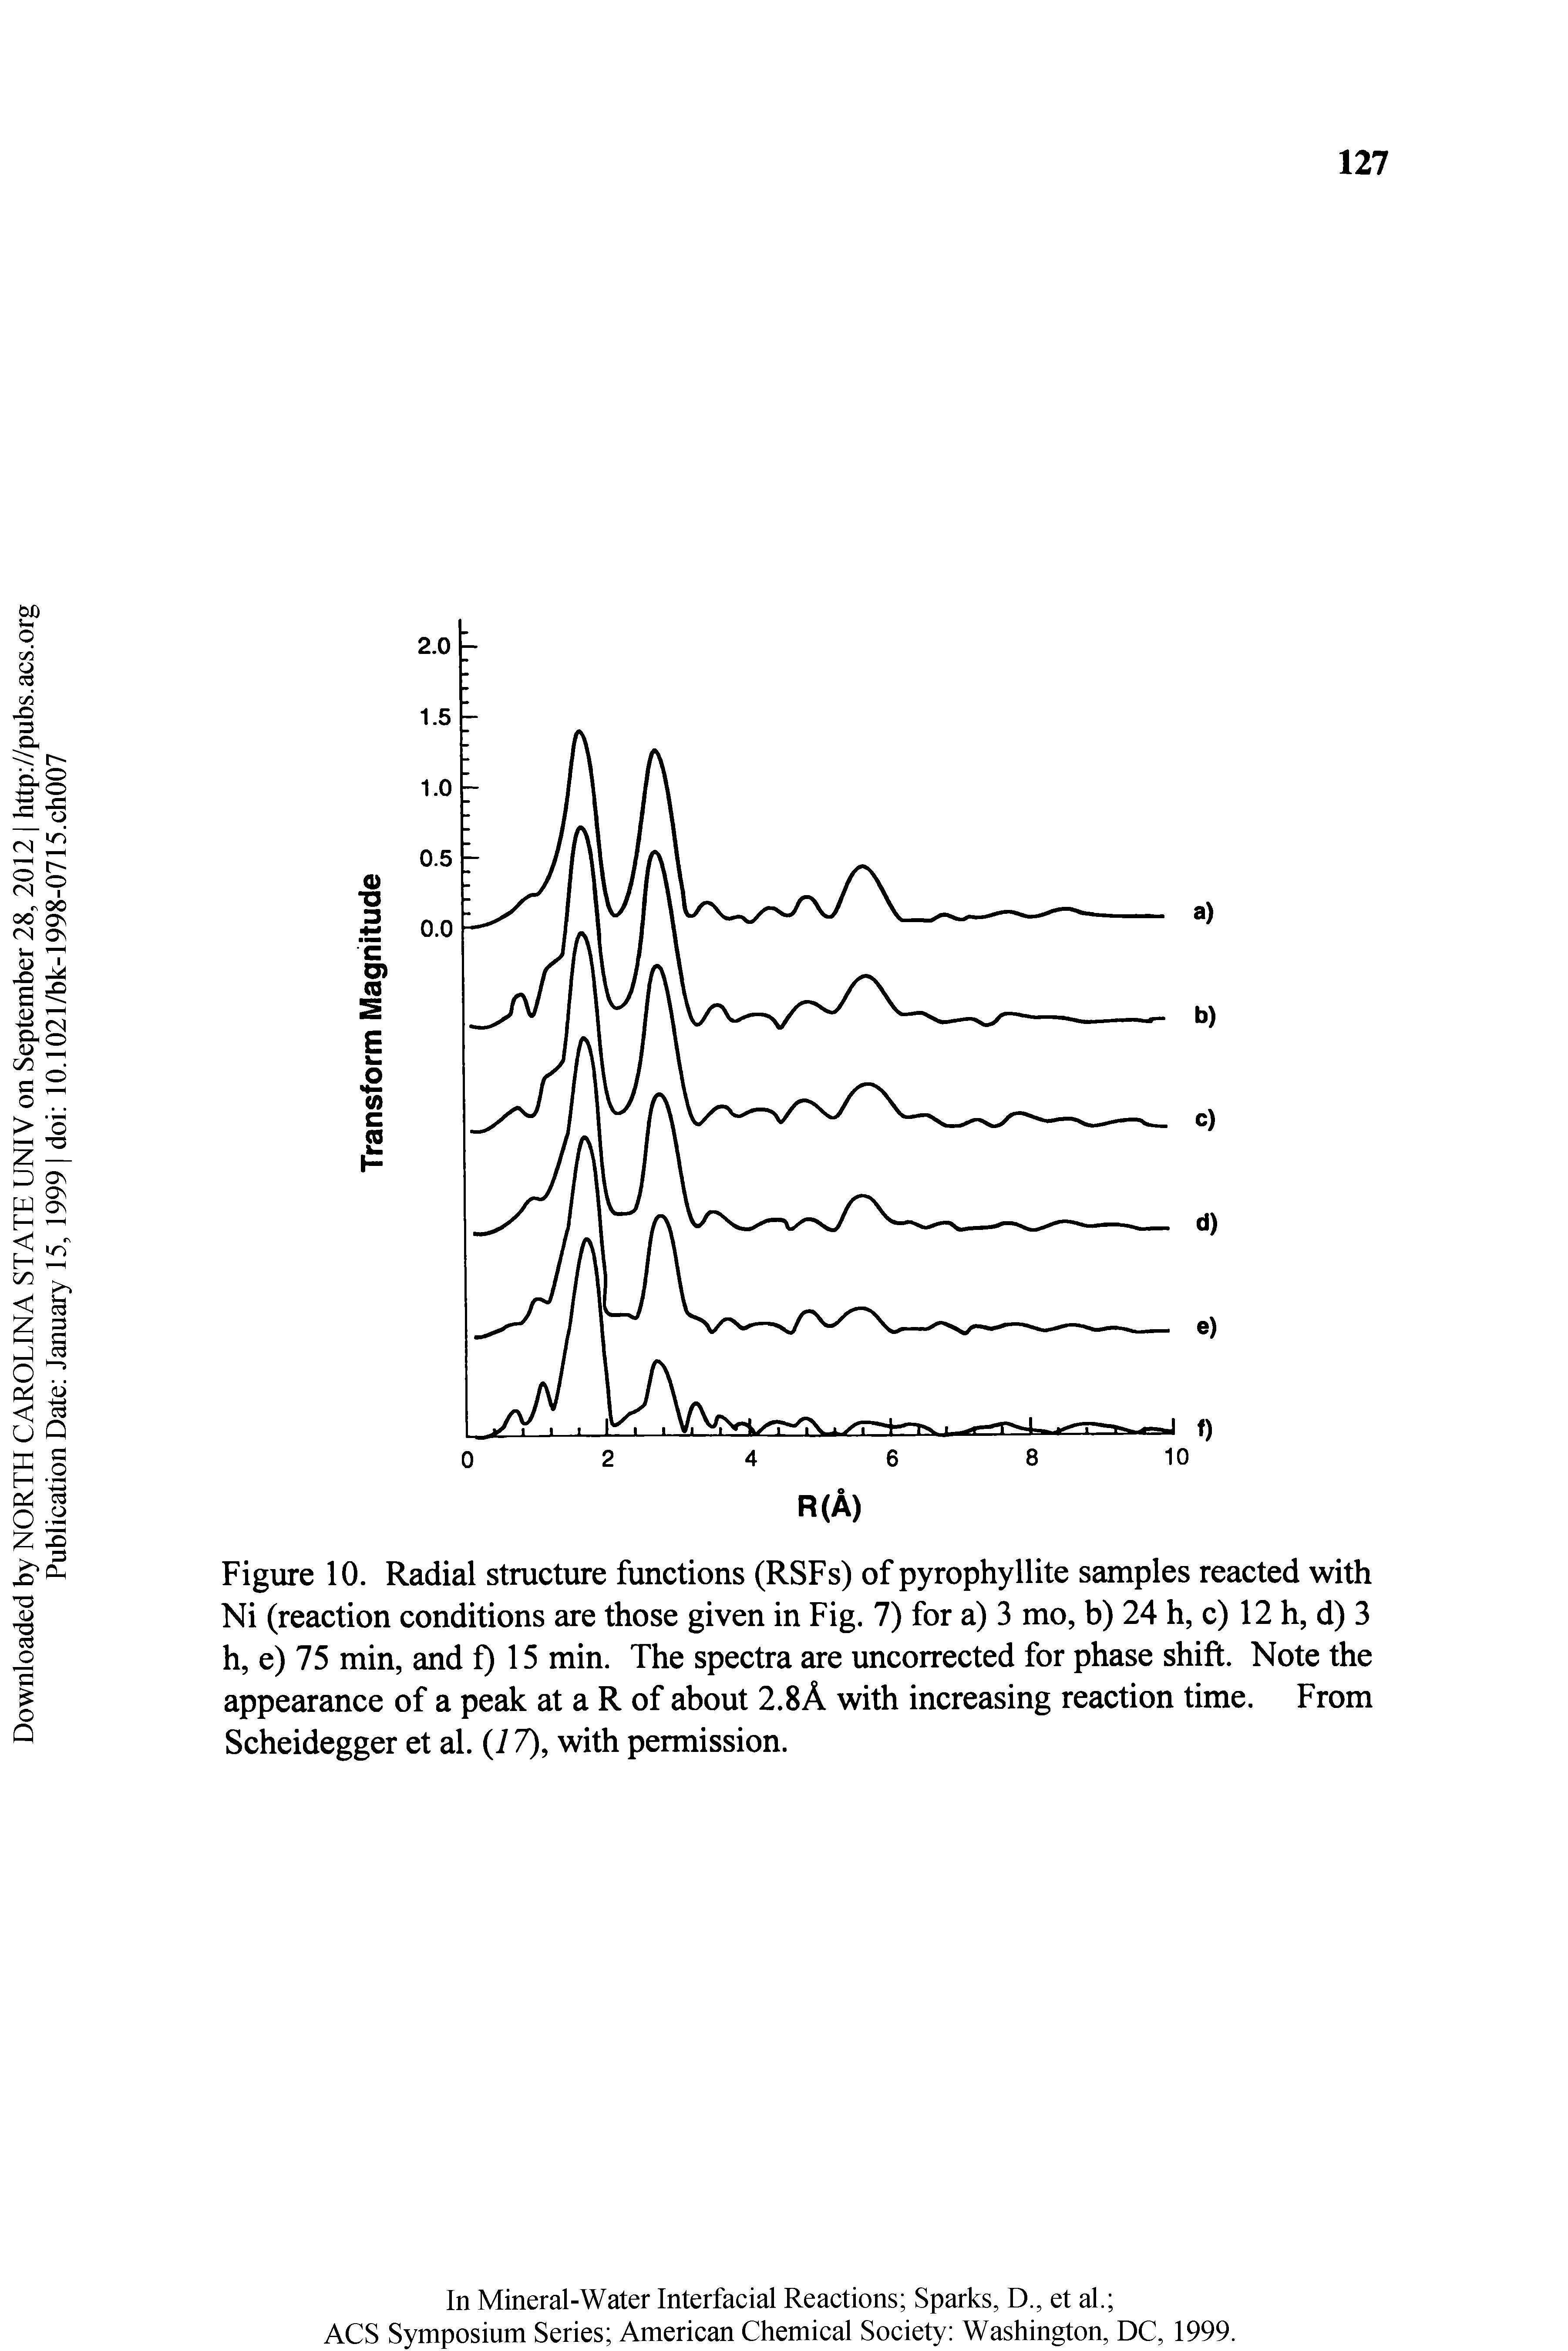 Figure 10. Radial structure functions (RSFs) of pyrophyllite samples reacted with Ni (reaction conditions are those given in Fig. 7) for a) 3 mo, b) 24 h, c) 12 h, d) 3 h, e) 75 min, and f) 15 min. The spectra are uncorrected for phase shift. Note the appearance of a peak at a R of about 2.8A with increasing reaction time. From Scheidegger et al. (7 7), with permission.